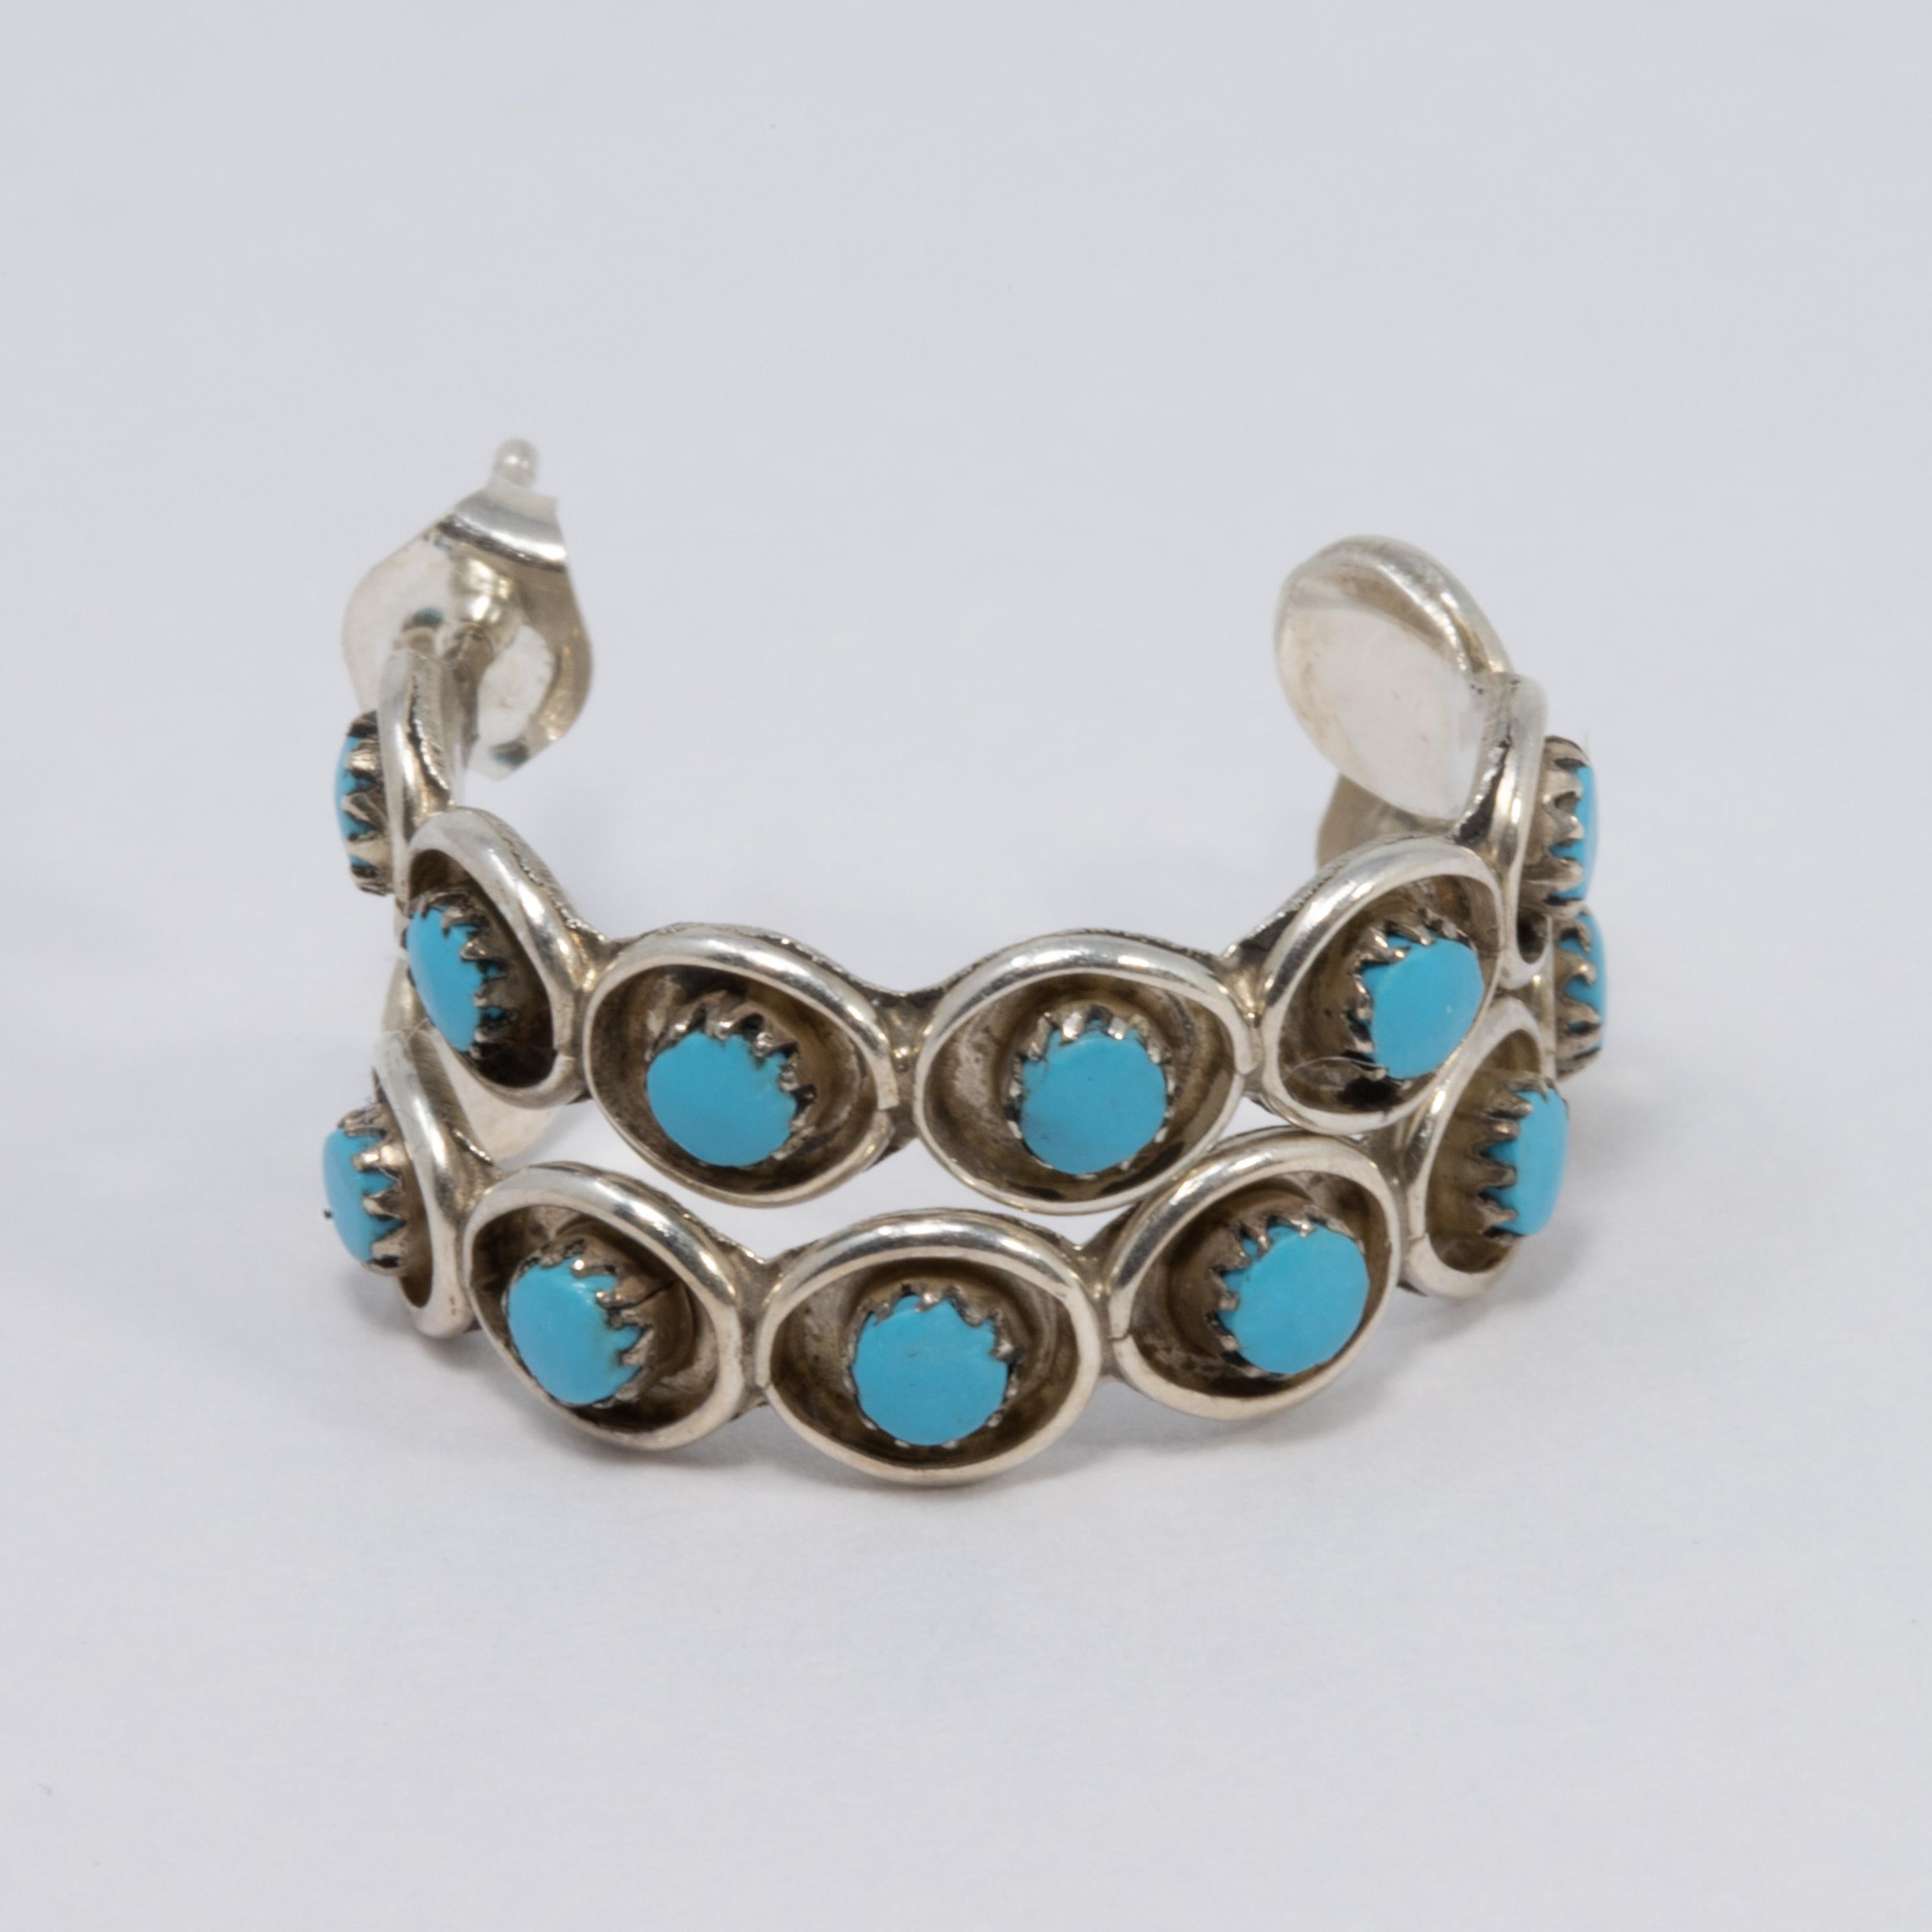 A pair of Native American handcrafted hoop earrings, featuring polished turquoise cabochons bezel set on a round sterling silver setting. Post back hardware.

Diameter - 20 mm